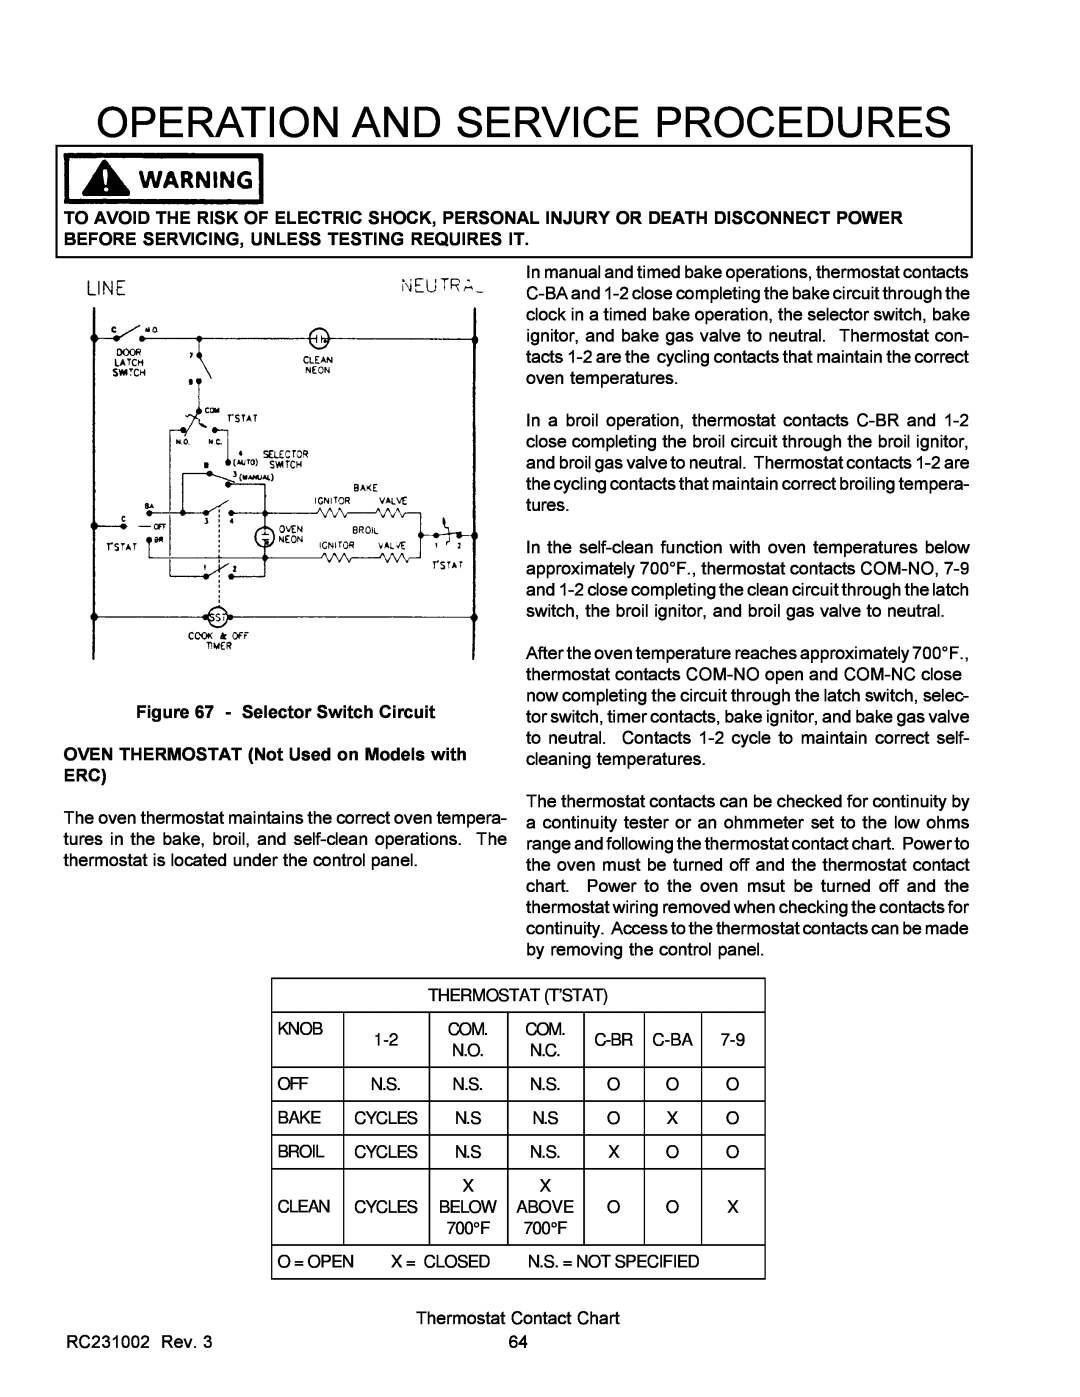 Amana RST, RSS Selector Switch Circuit, OVEN THERMOSTAT Not Used on Models with ERC, Operation And Service Procedures 